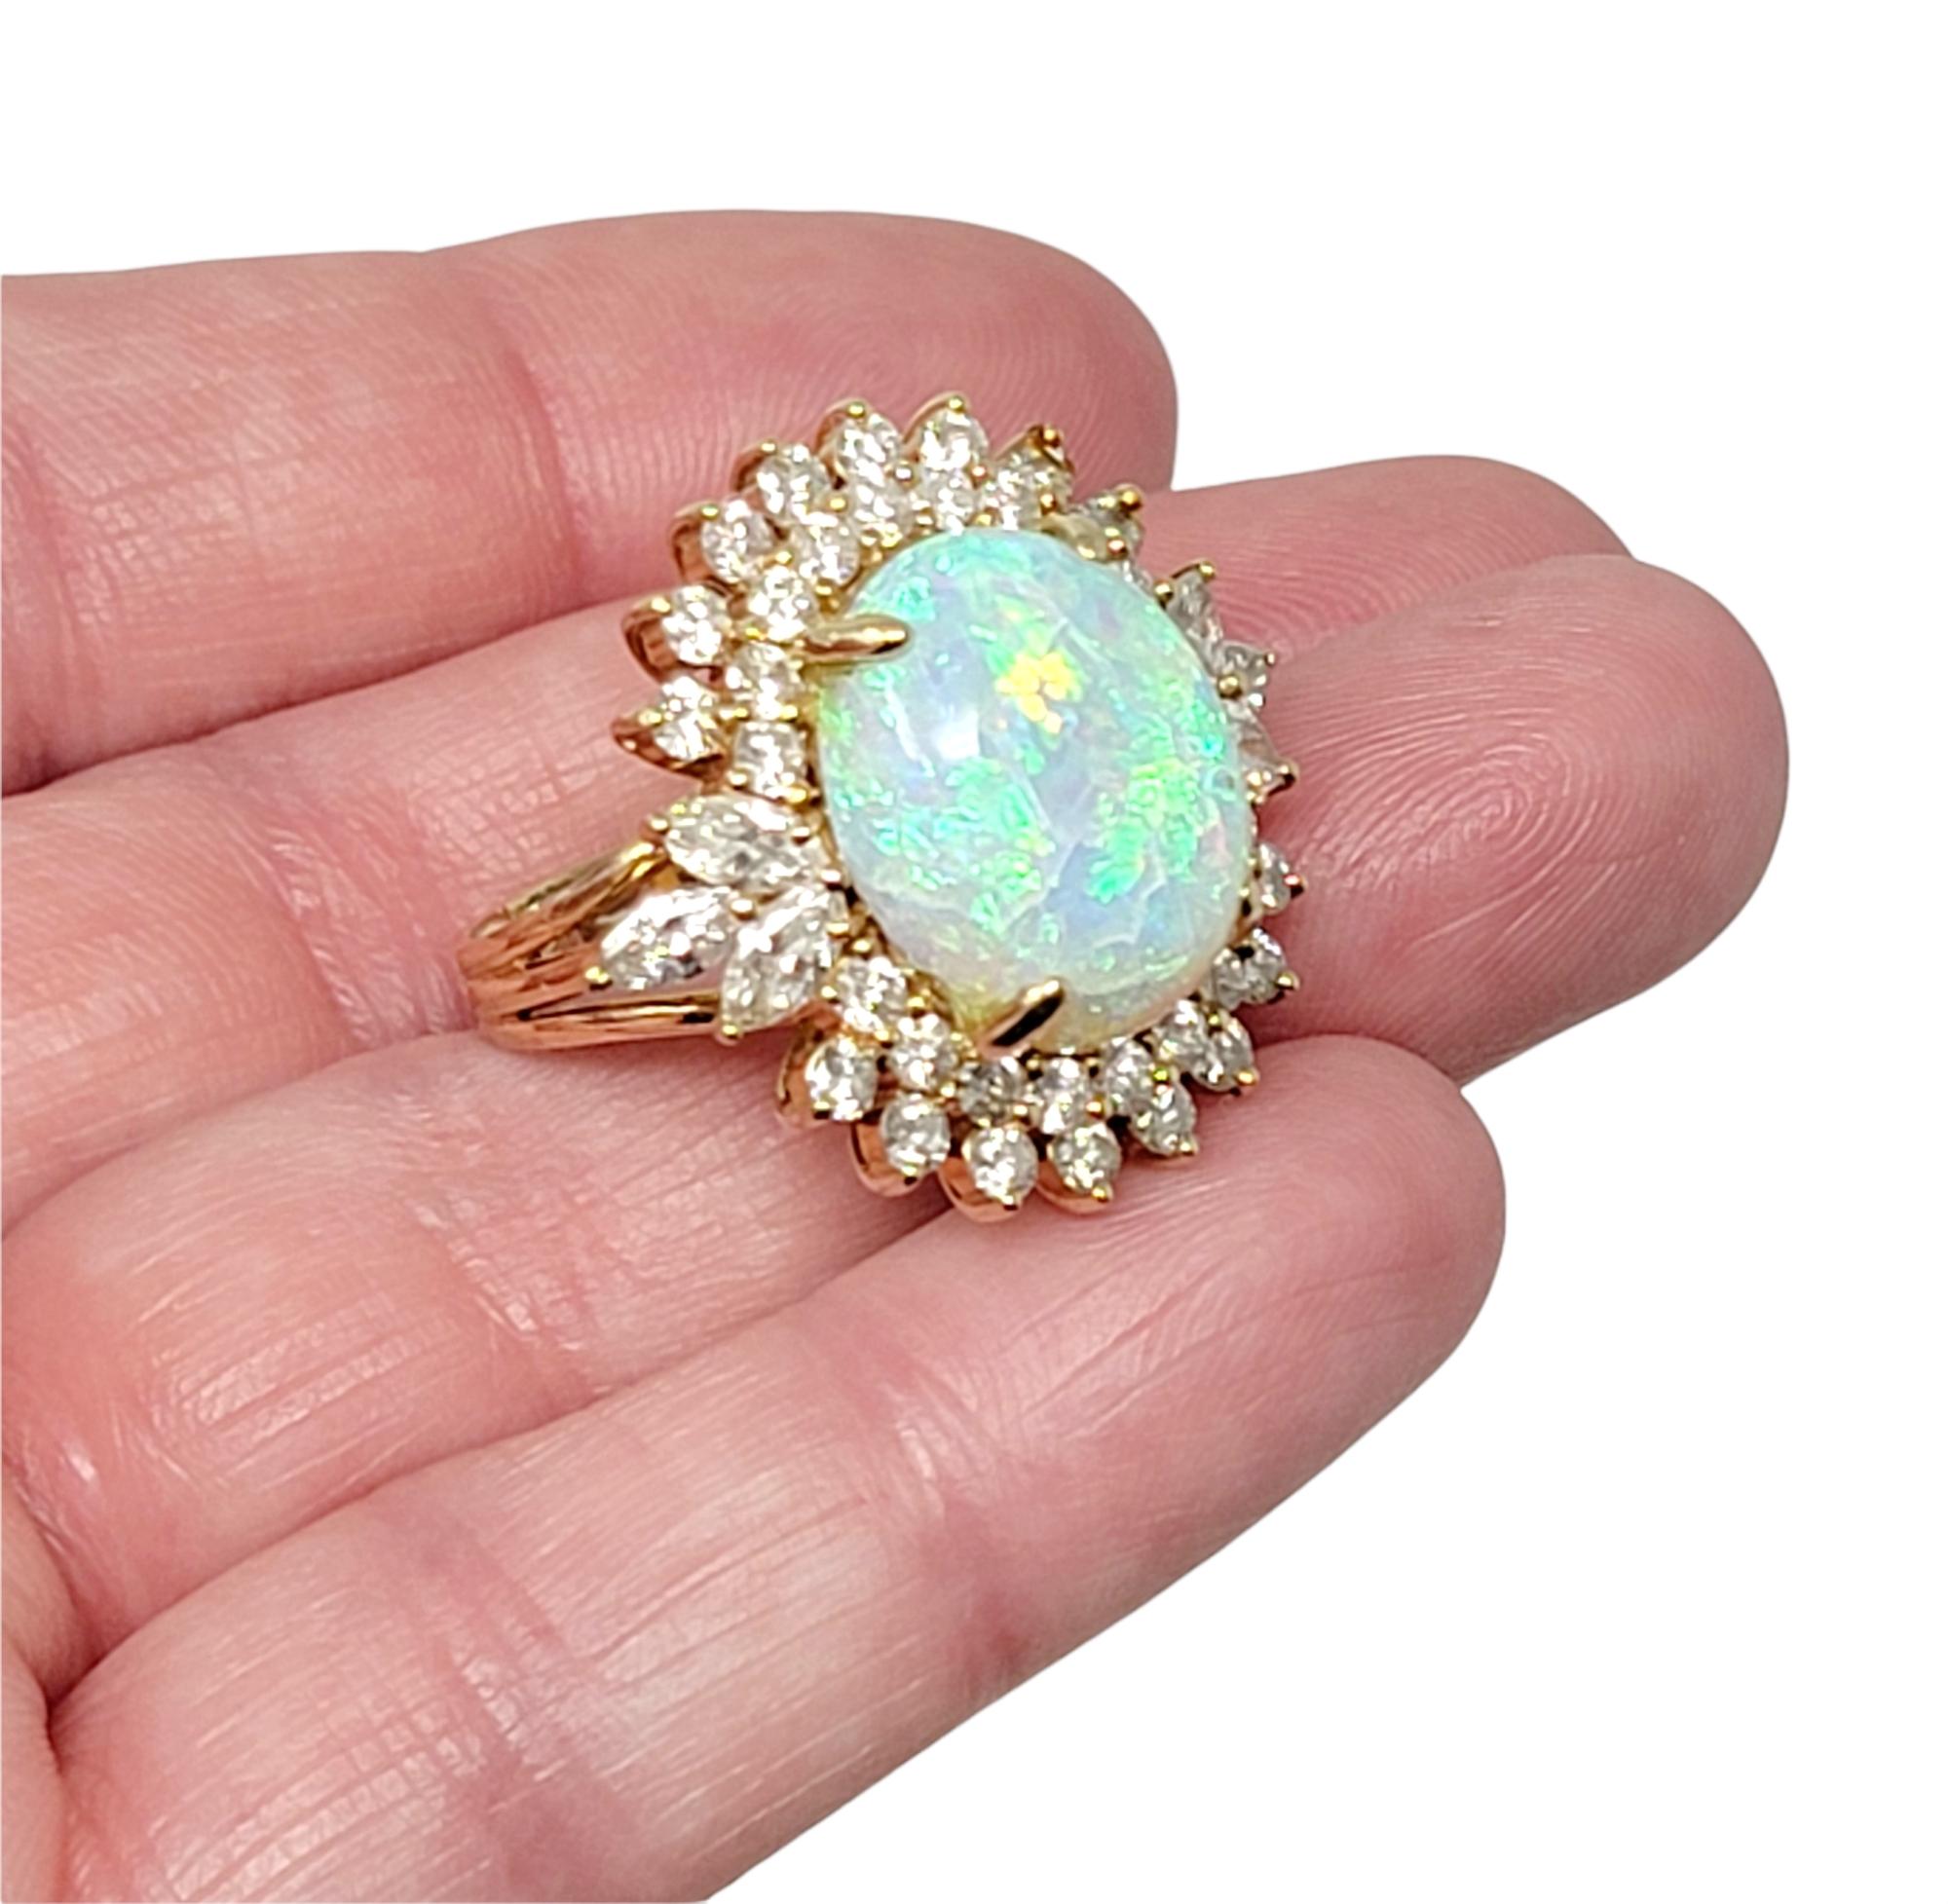 7.55 Carats Total Opal Cabochon and Diamond Halo Ring in 14 Karat Yellow Gold For Sale 10